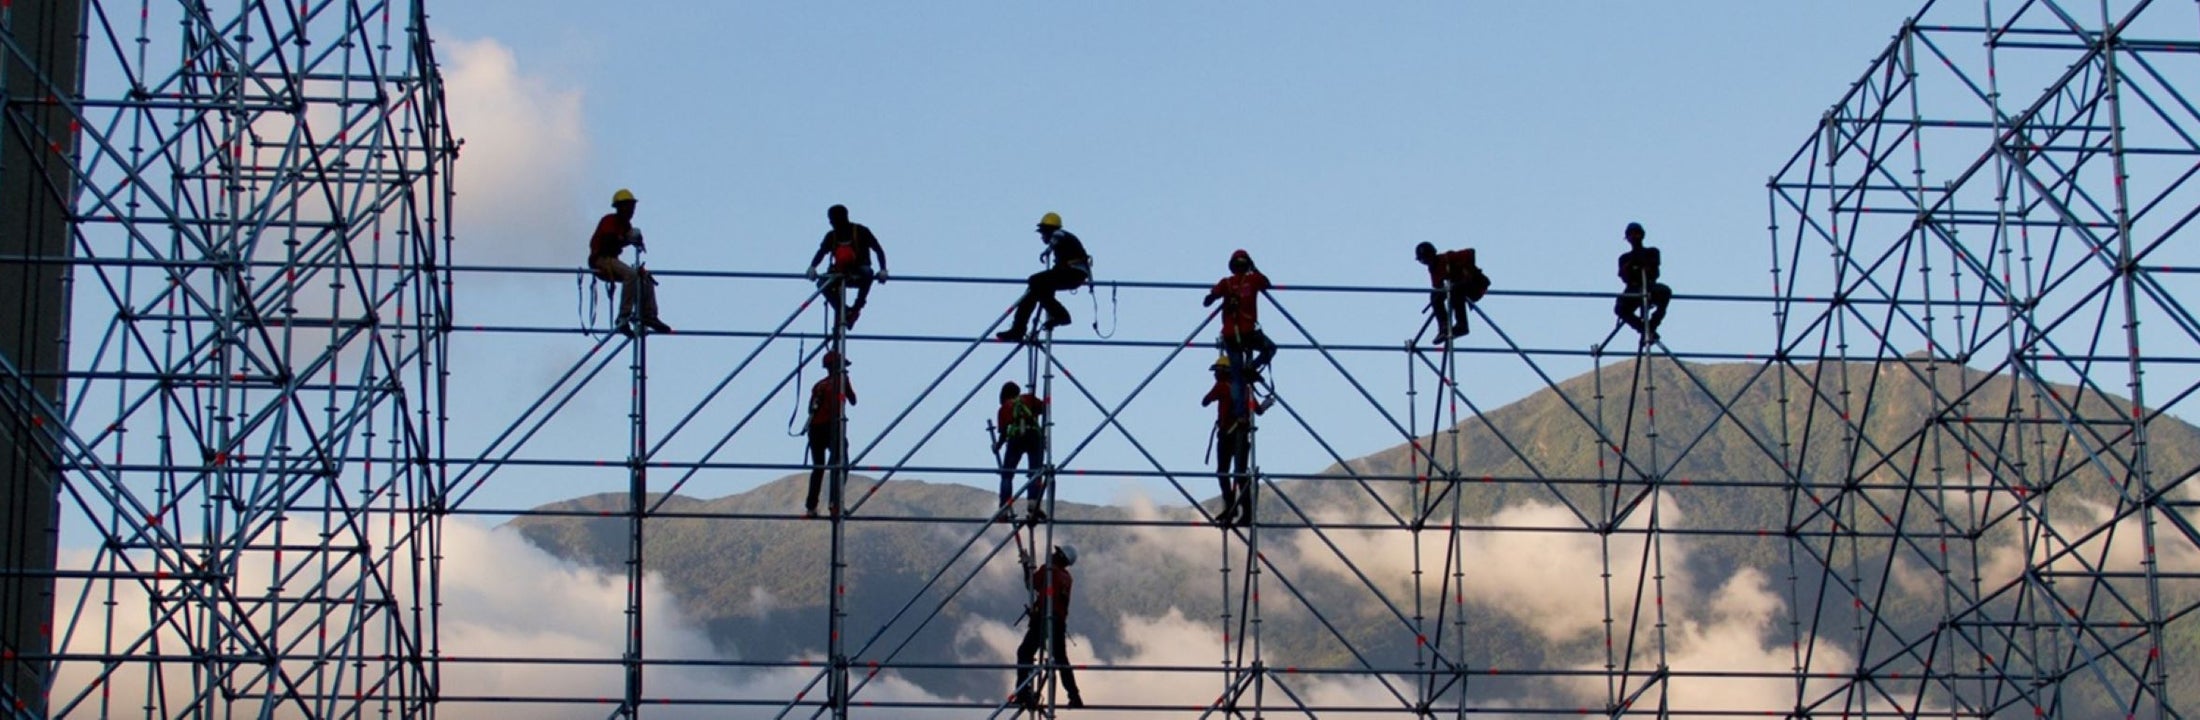 People at work on a scaffolding